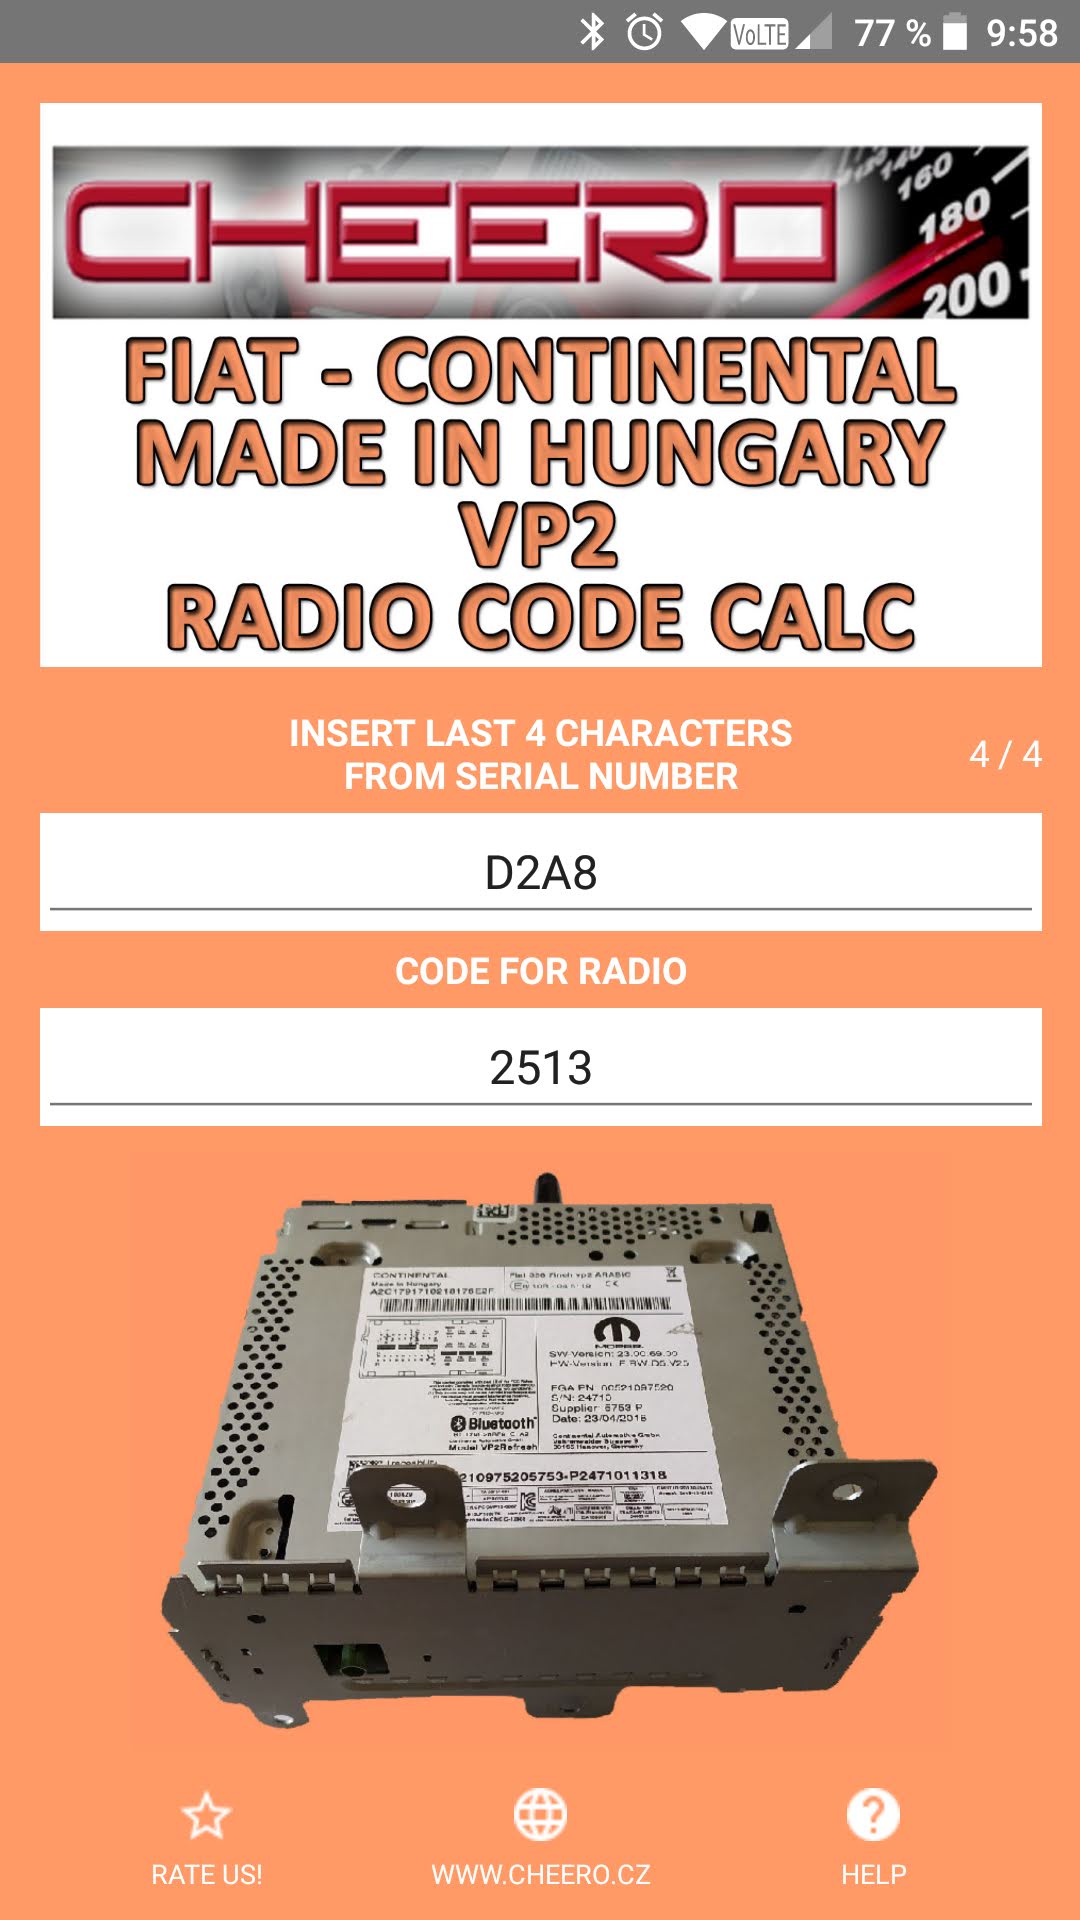 RADIO CODE FOR FIAT TIPO CONTINENTAL VP2 HUNGARY